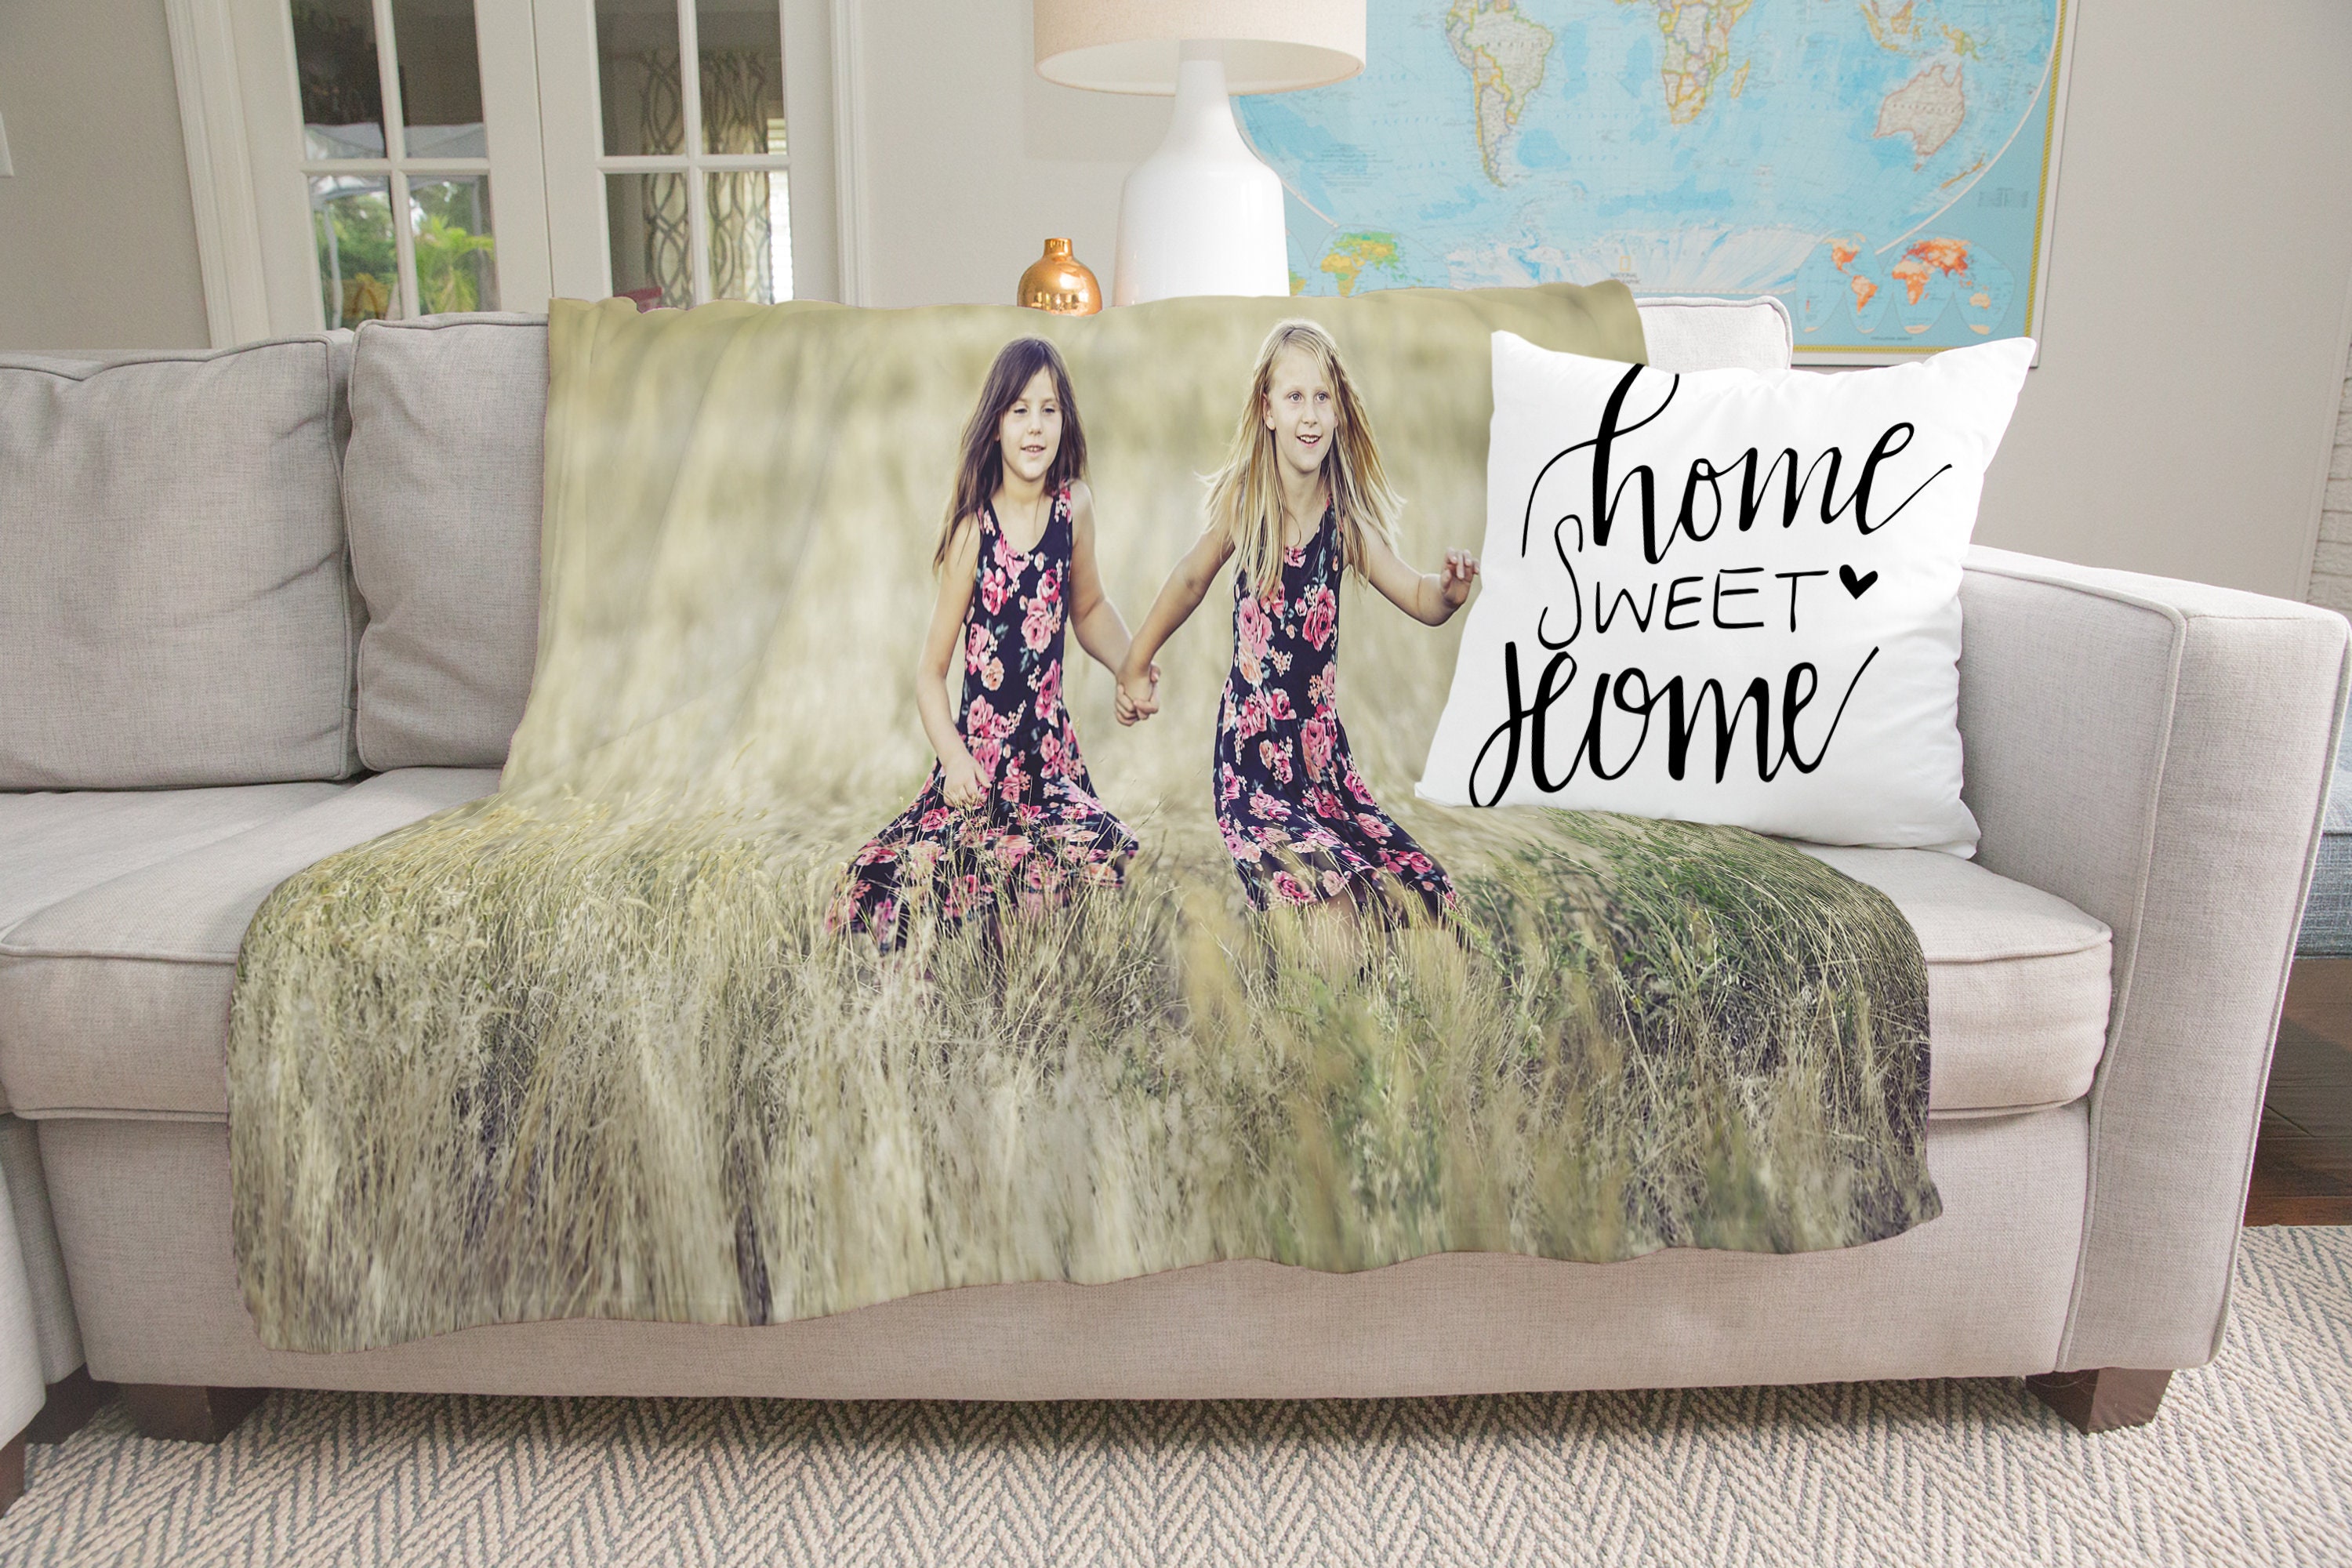  Glohox Custom Blankets with Picture, Customized Sofa Throw  Blanket,This is My Christmas Movie Watching Blanket,Personalized Blanket  for Women Men Baby Kid 70x80 : Home & Kitchen